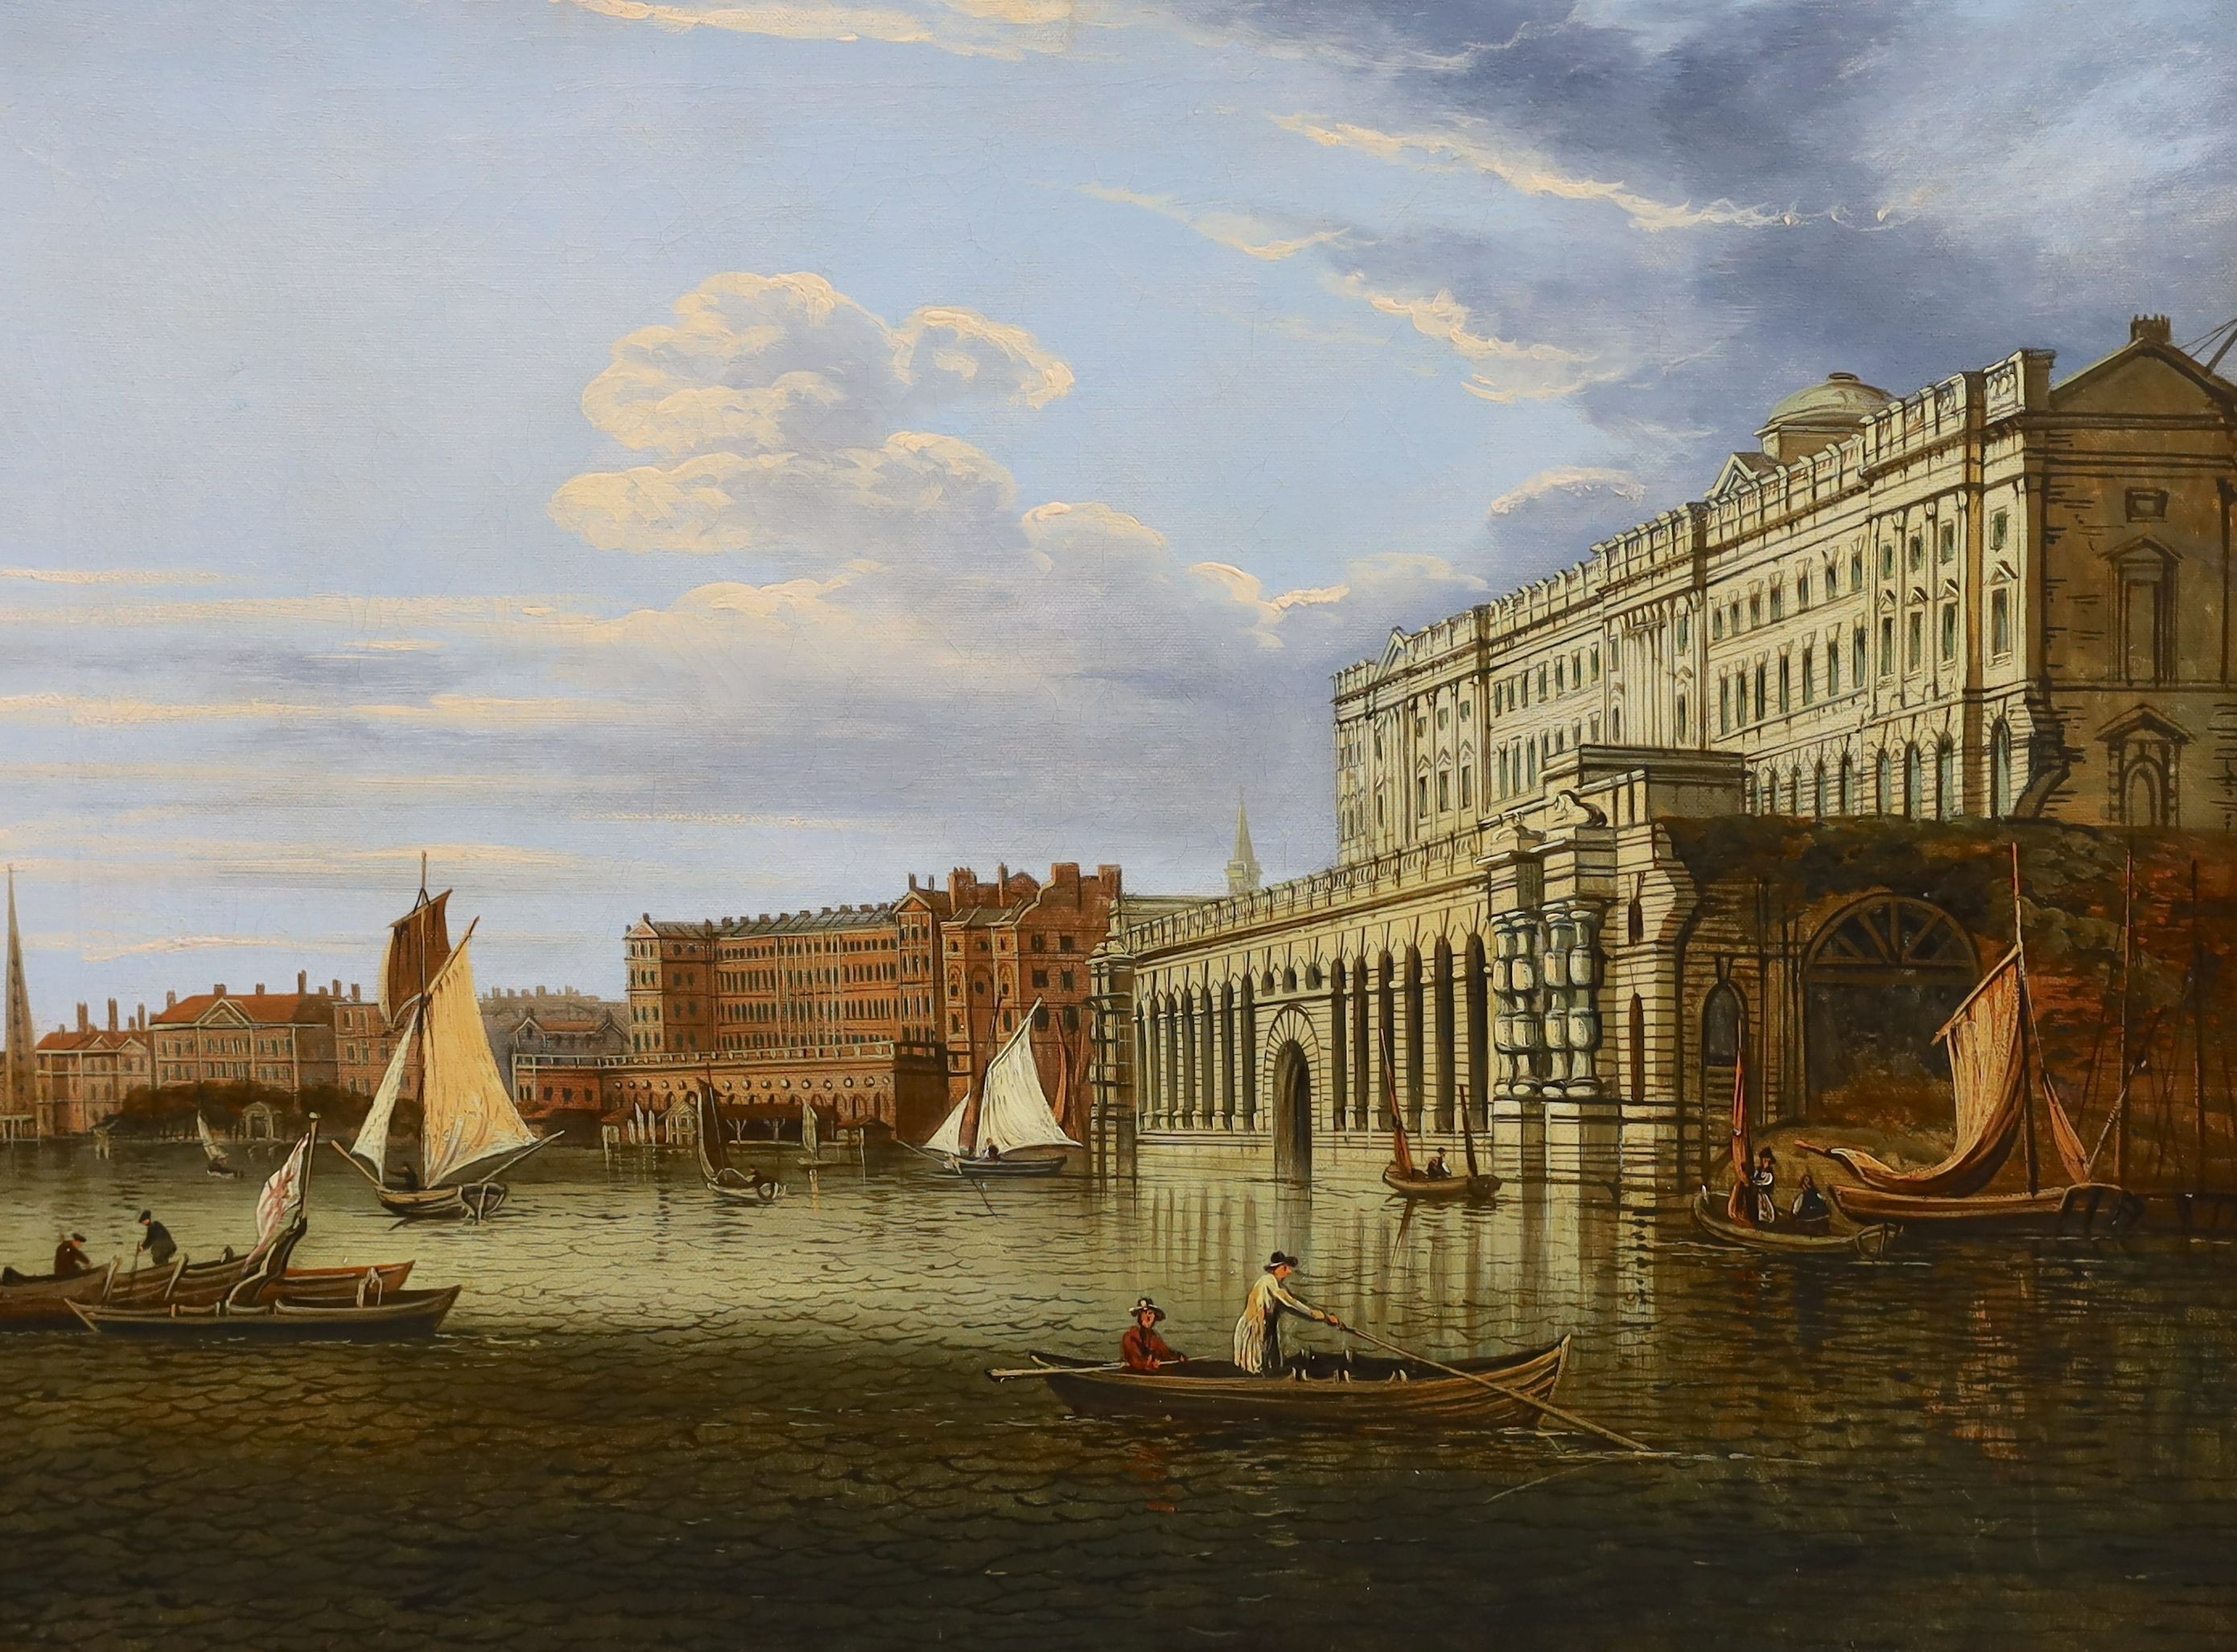 Circle of John Dean Paul (1775-1852), Somerset House and The Adelphi from the river, London, oil on canvas, 59.5 x 44.5cm